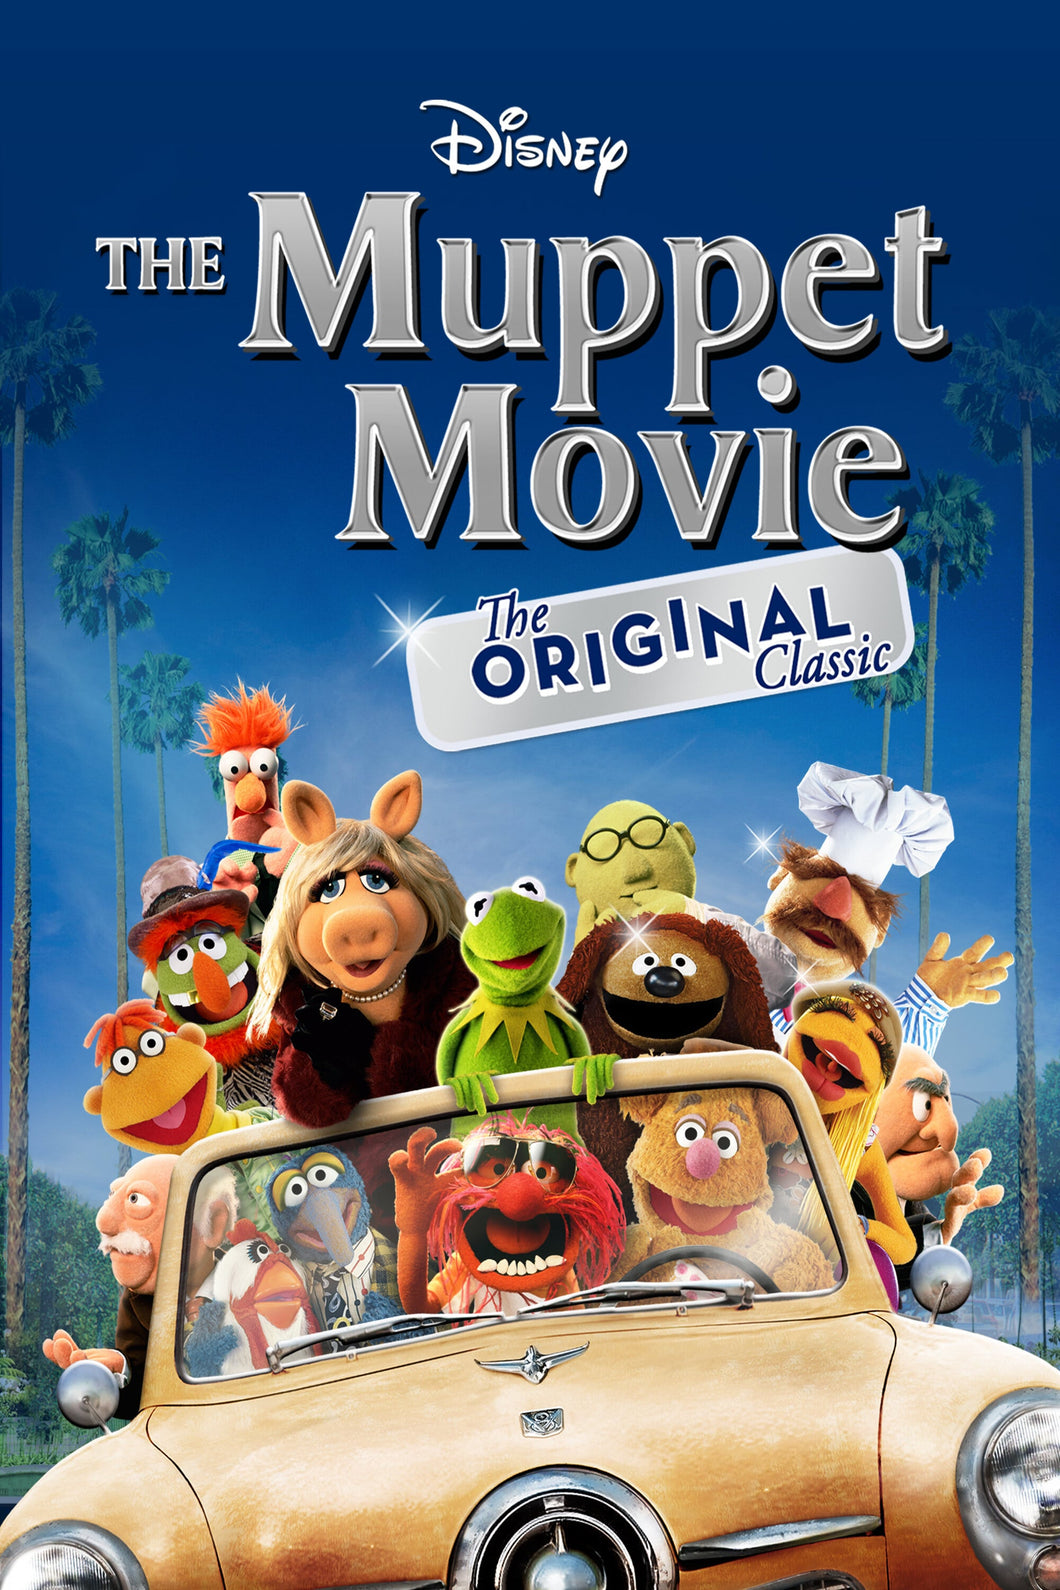 The Muppet Movie (1979)V2 Movie Poster High Quality Glossy Paper A1 A2 A3 A4 A3 Framed or Unframed!!!